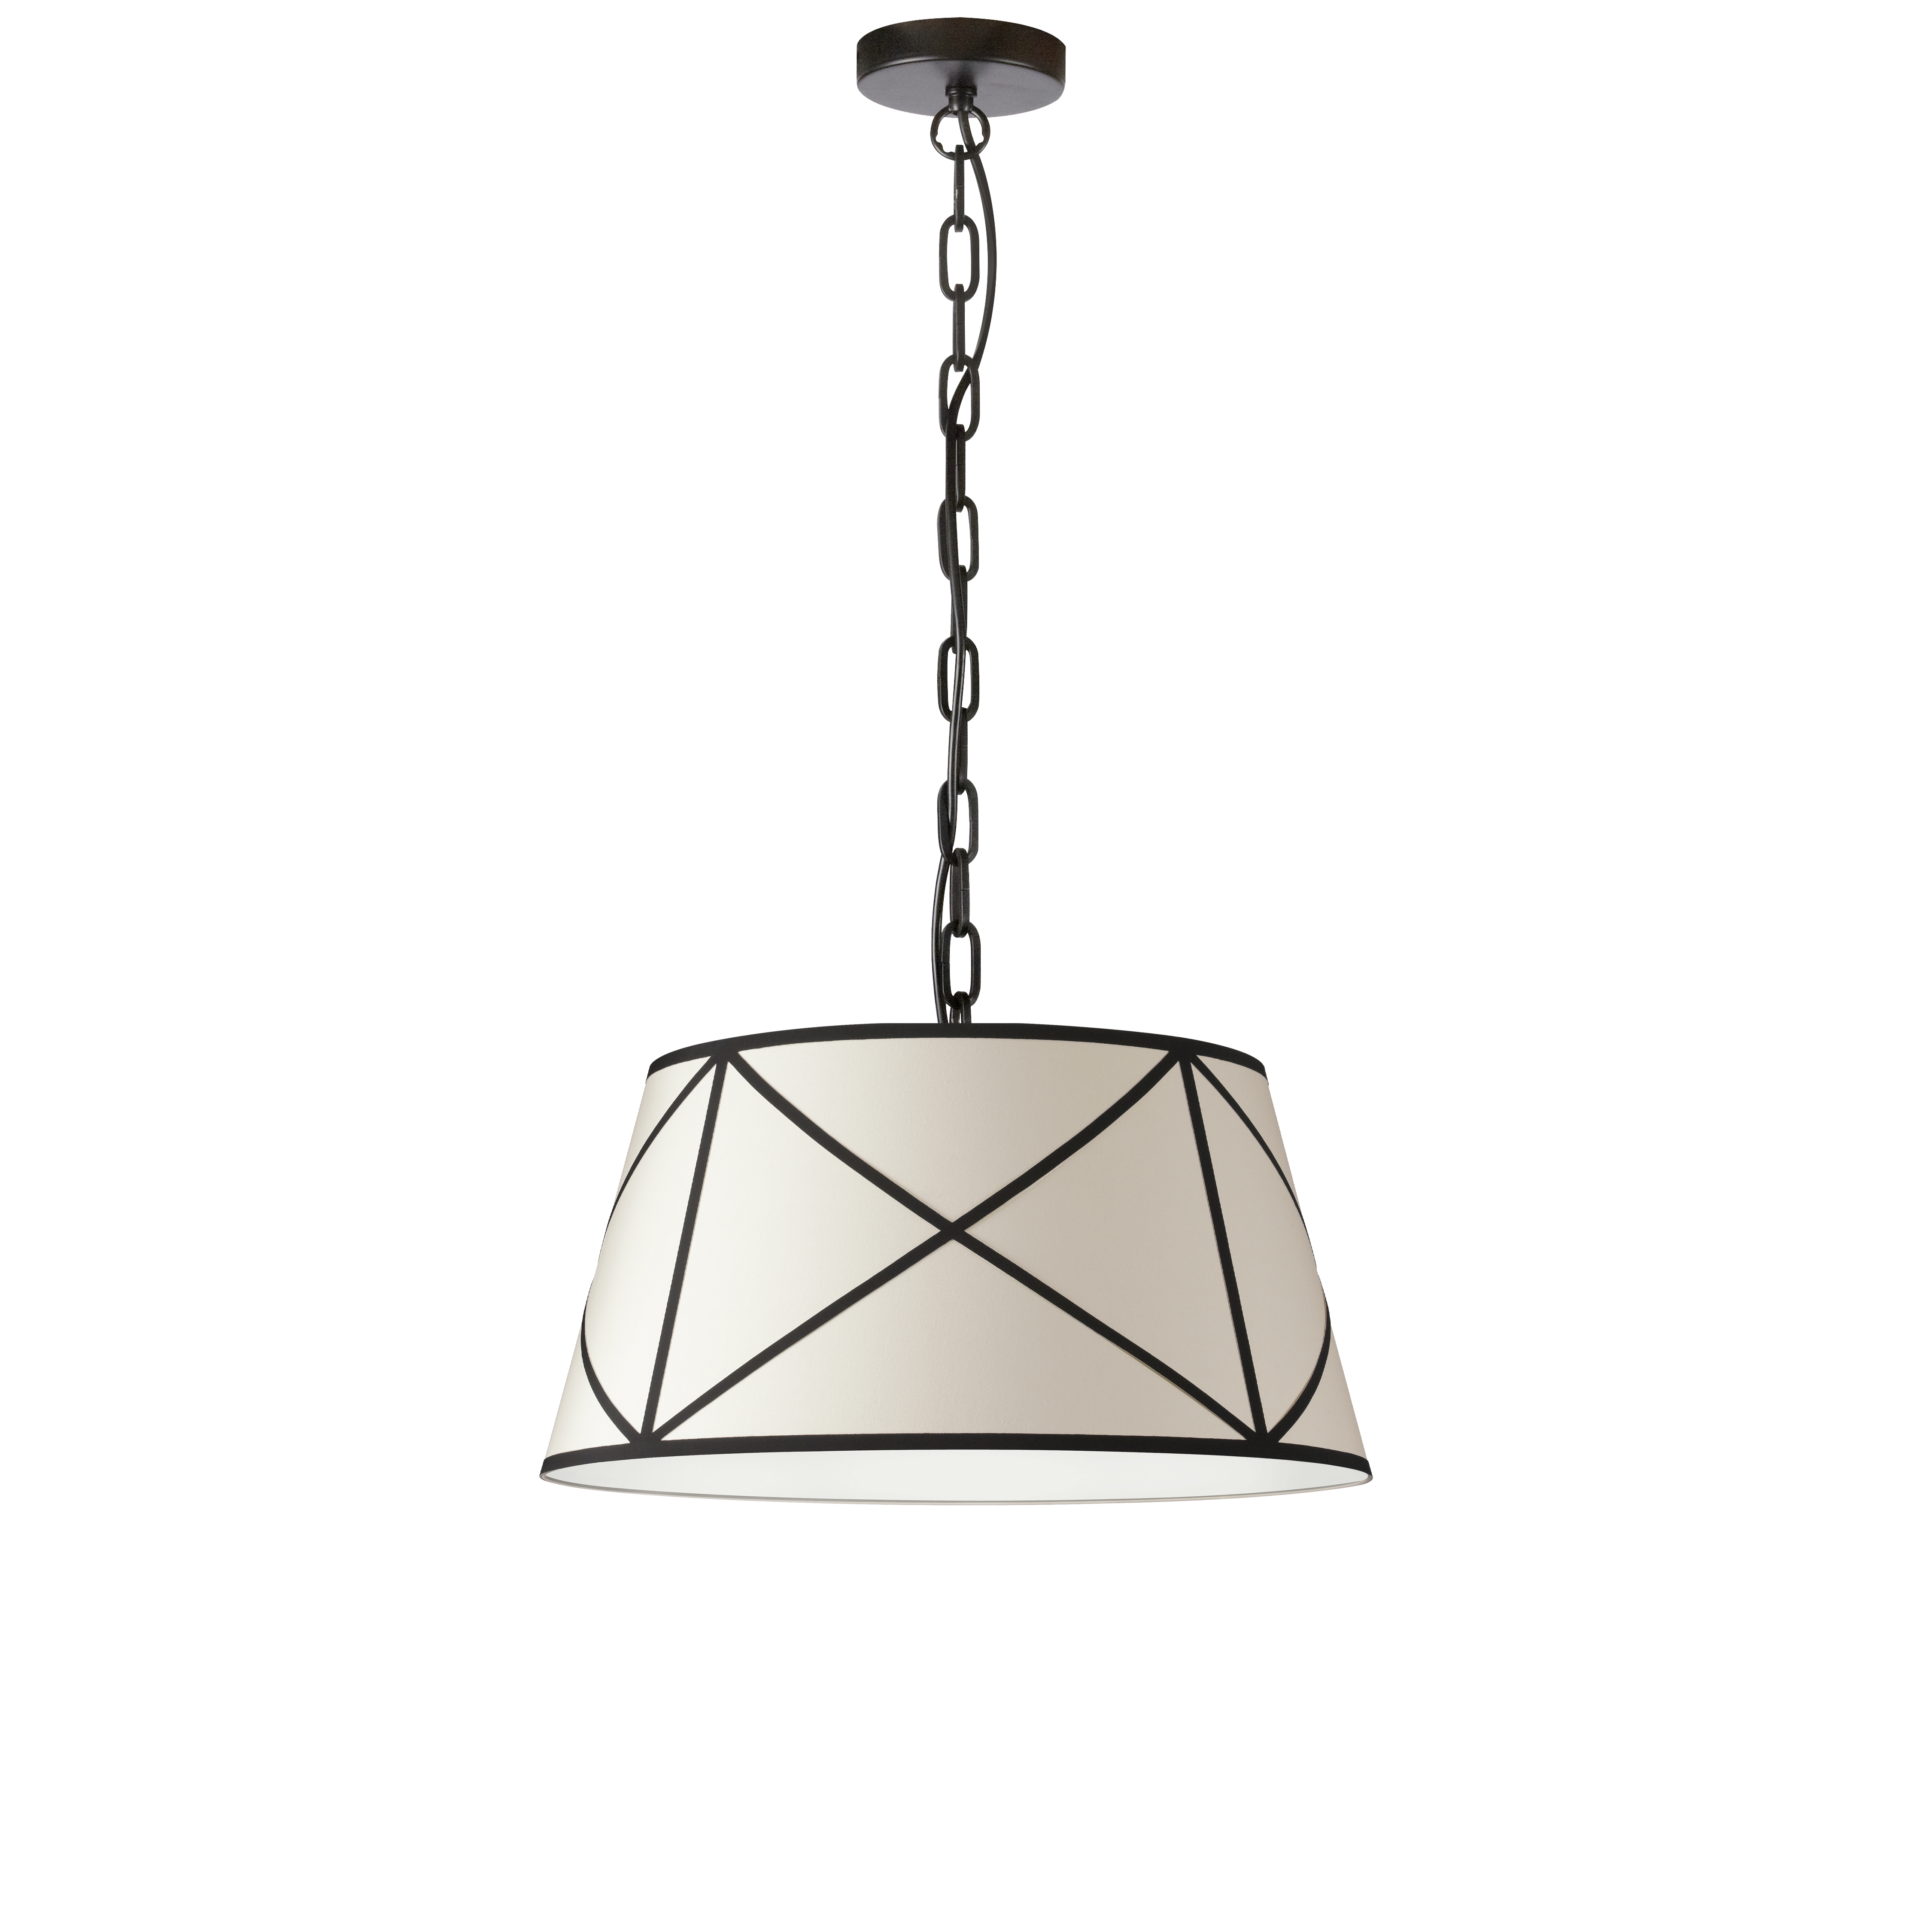 The Parker family of lighting has a stylish silhouette, and details that are reminiscent of stately mid-century furnishings. Clean modern lines give it a versatile transitional design that blends with a variety of styles and décor schemes. A classic chain drops to an inverted tapered drum fabric shade, with a metal canopy and frame crafted in an elegant linear design. The look can be modified by your choice of metallic finish and contrasting fabric shade. The effect is opulent, and with its range of sizes, Parker lighting adds a note of luxury to virtually any room in your home.